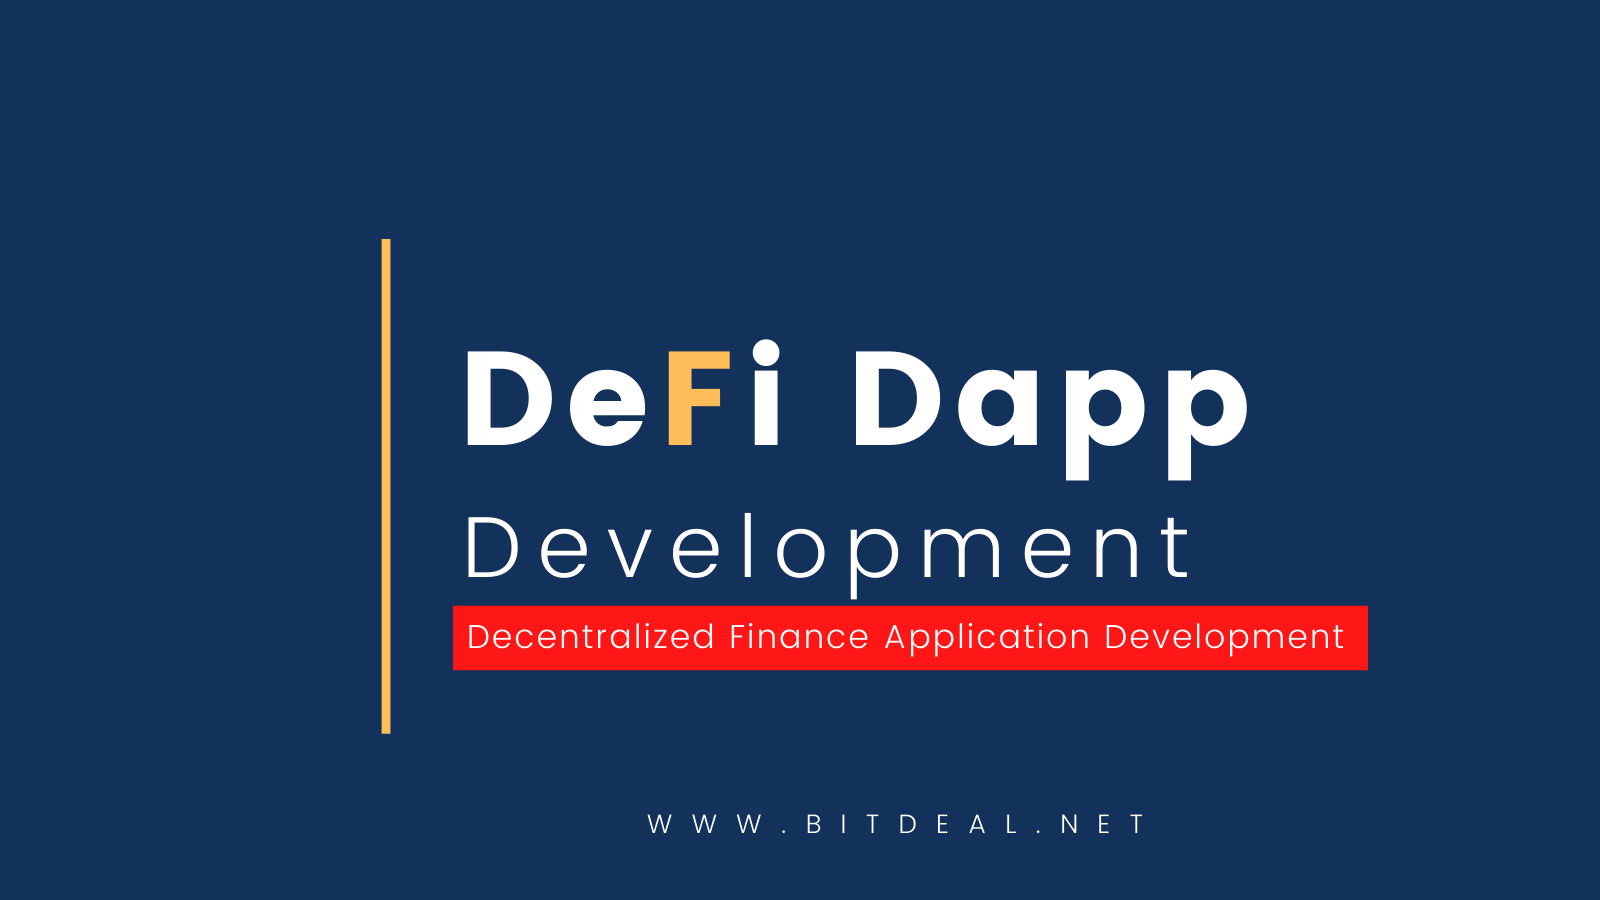 DeFi Dapp Development to Accelerate Your Financial Business and ROI